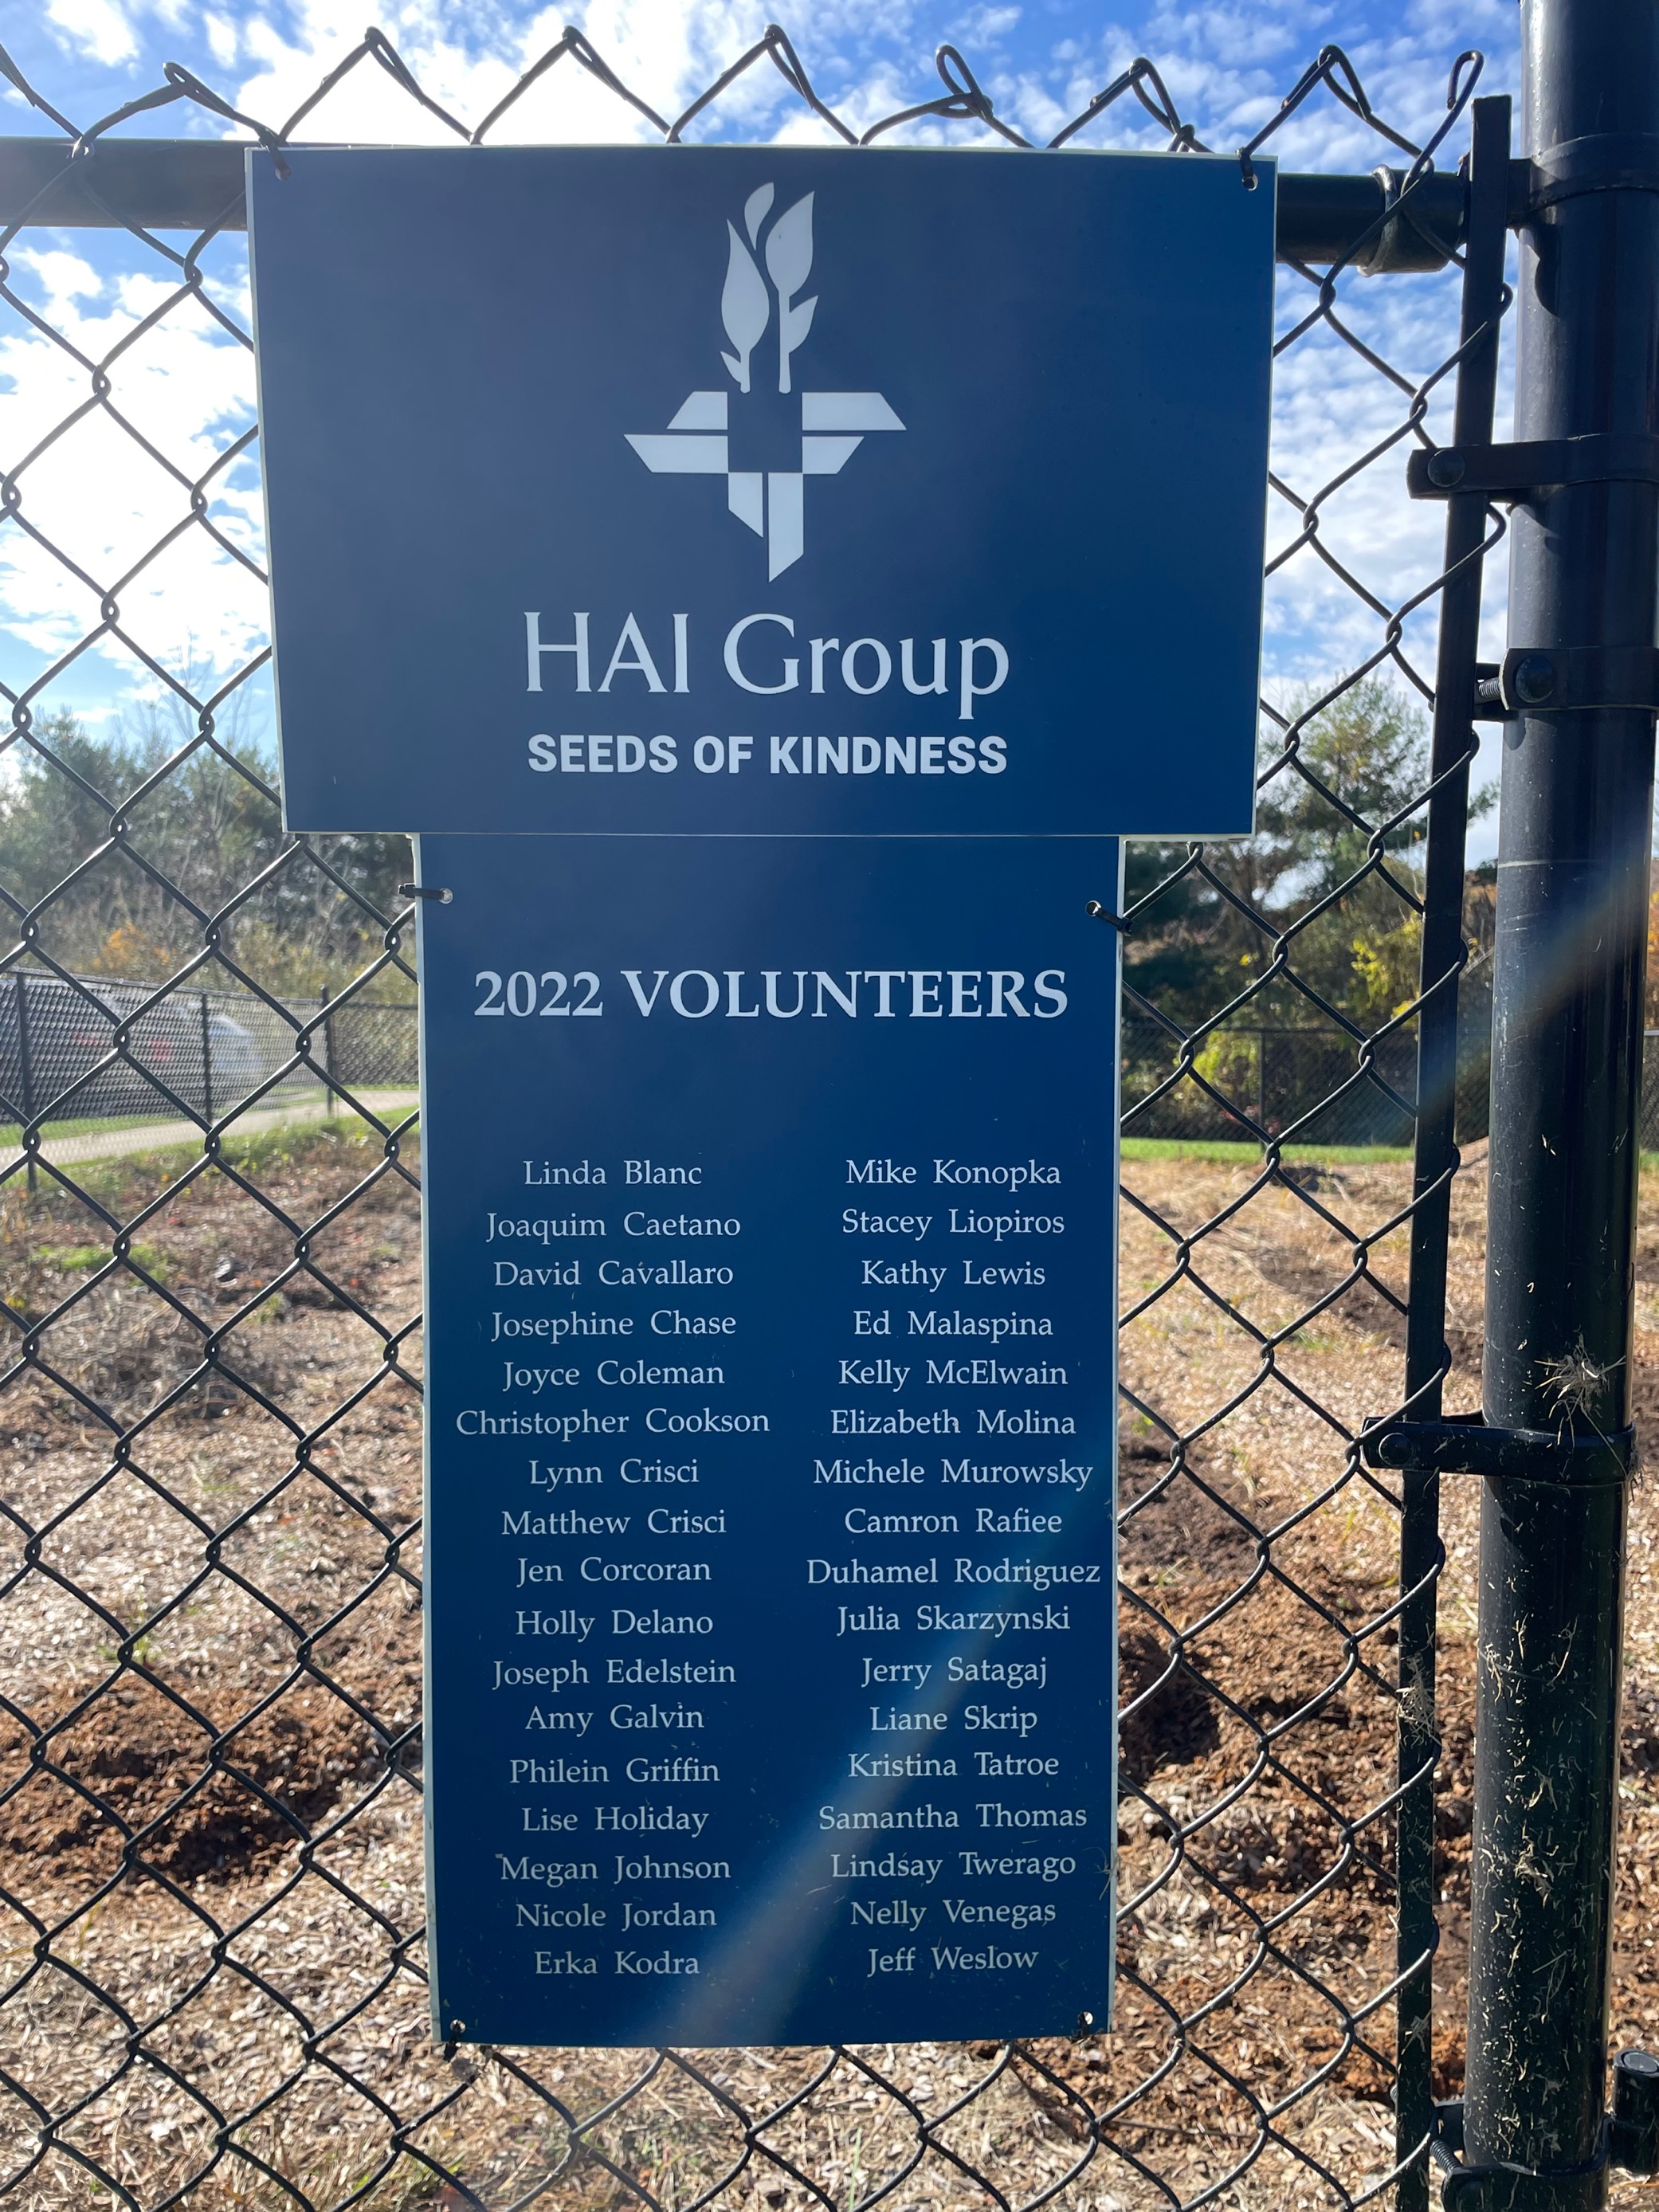 A sign showing the names of HAI Group garden volunteers from 2022